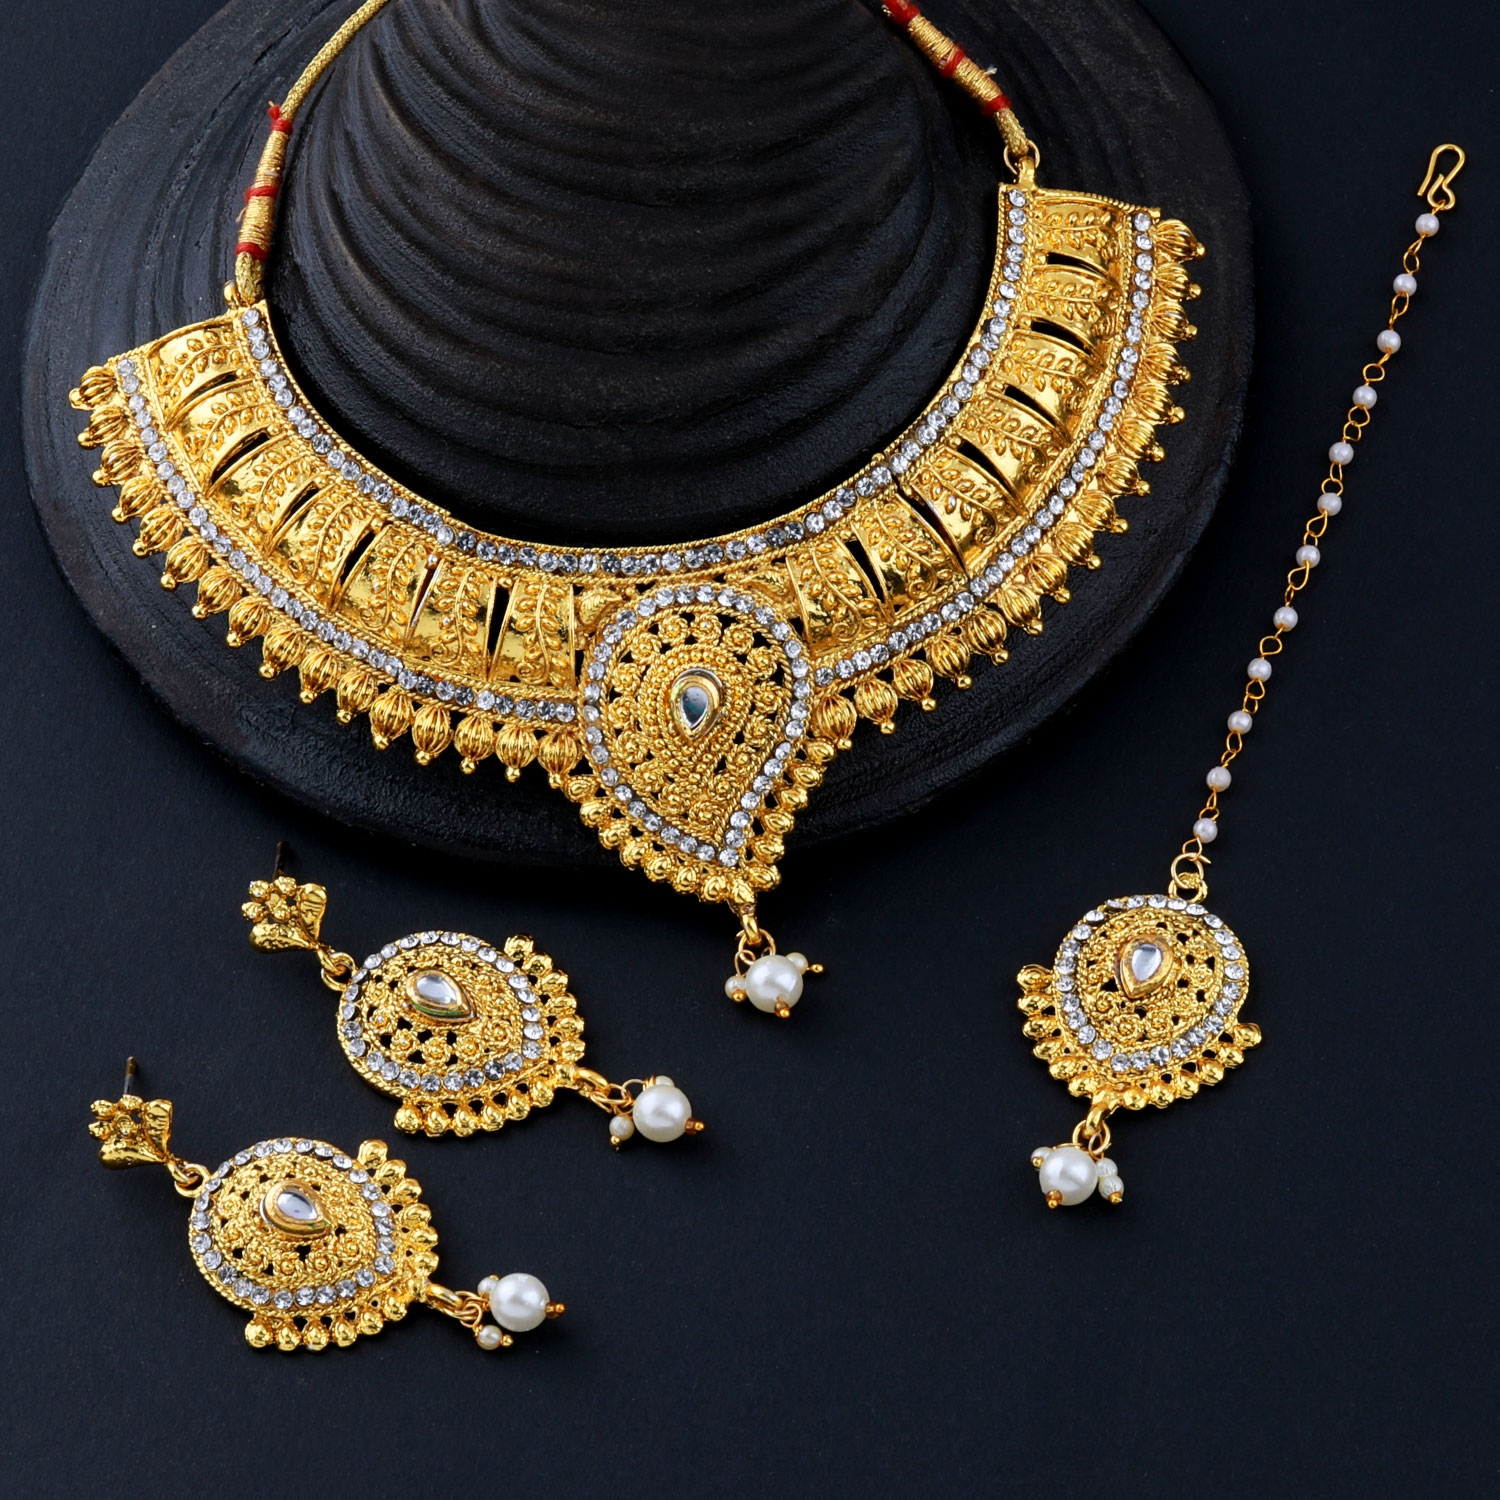 Wonderful Choker Necklace Set With Earring For Women & Girls